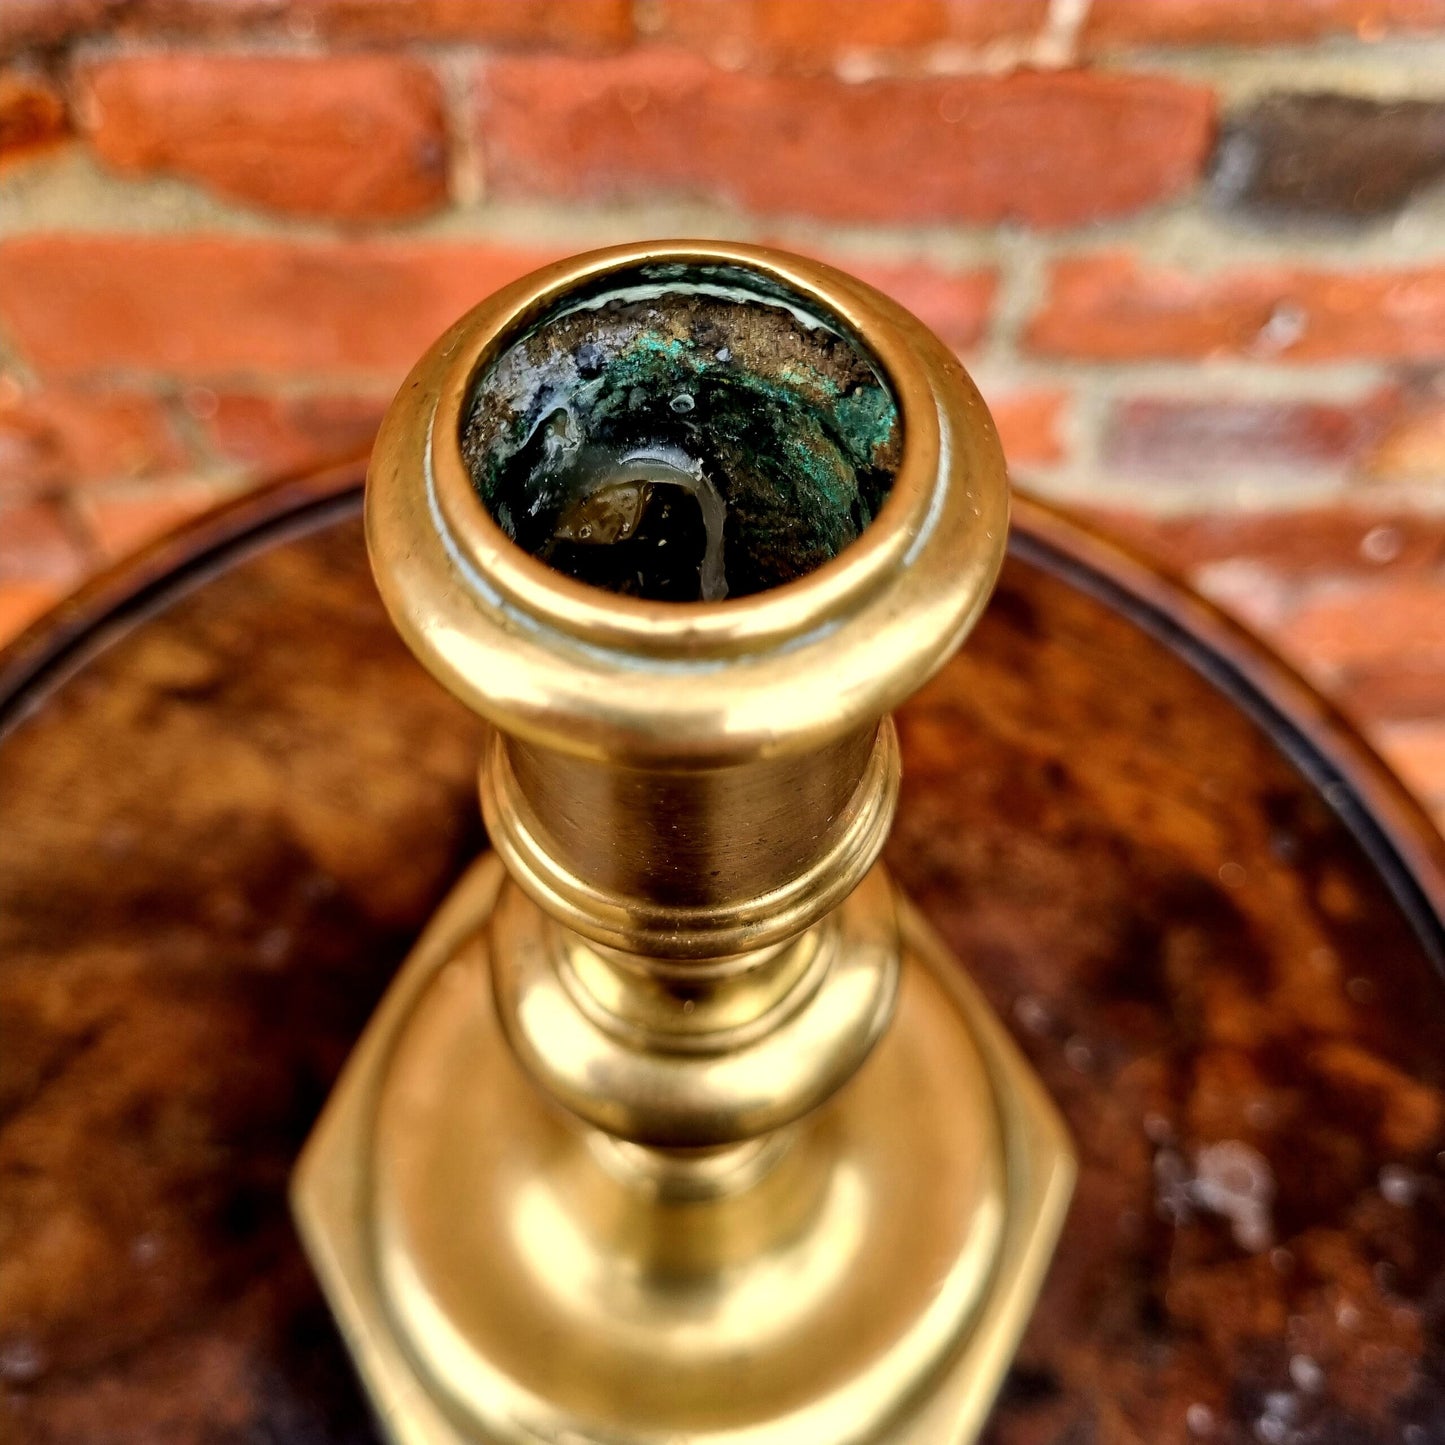 17th Century French Antique Brass Candlestick, circa 1680, bearing the initials "MVH"